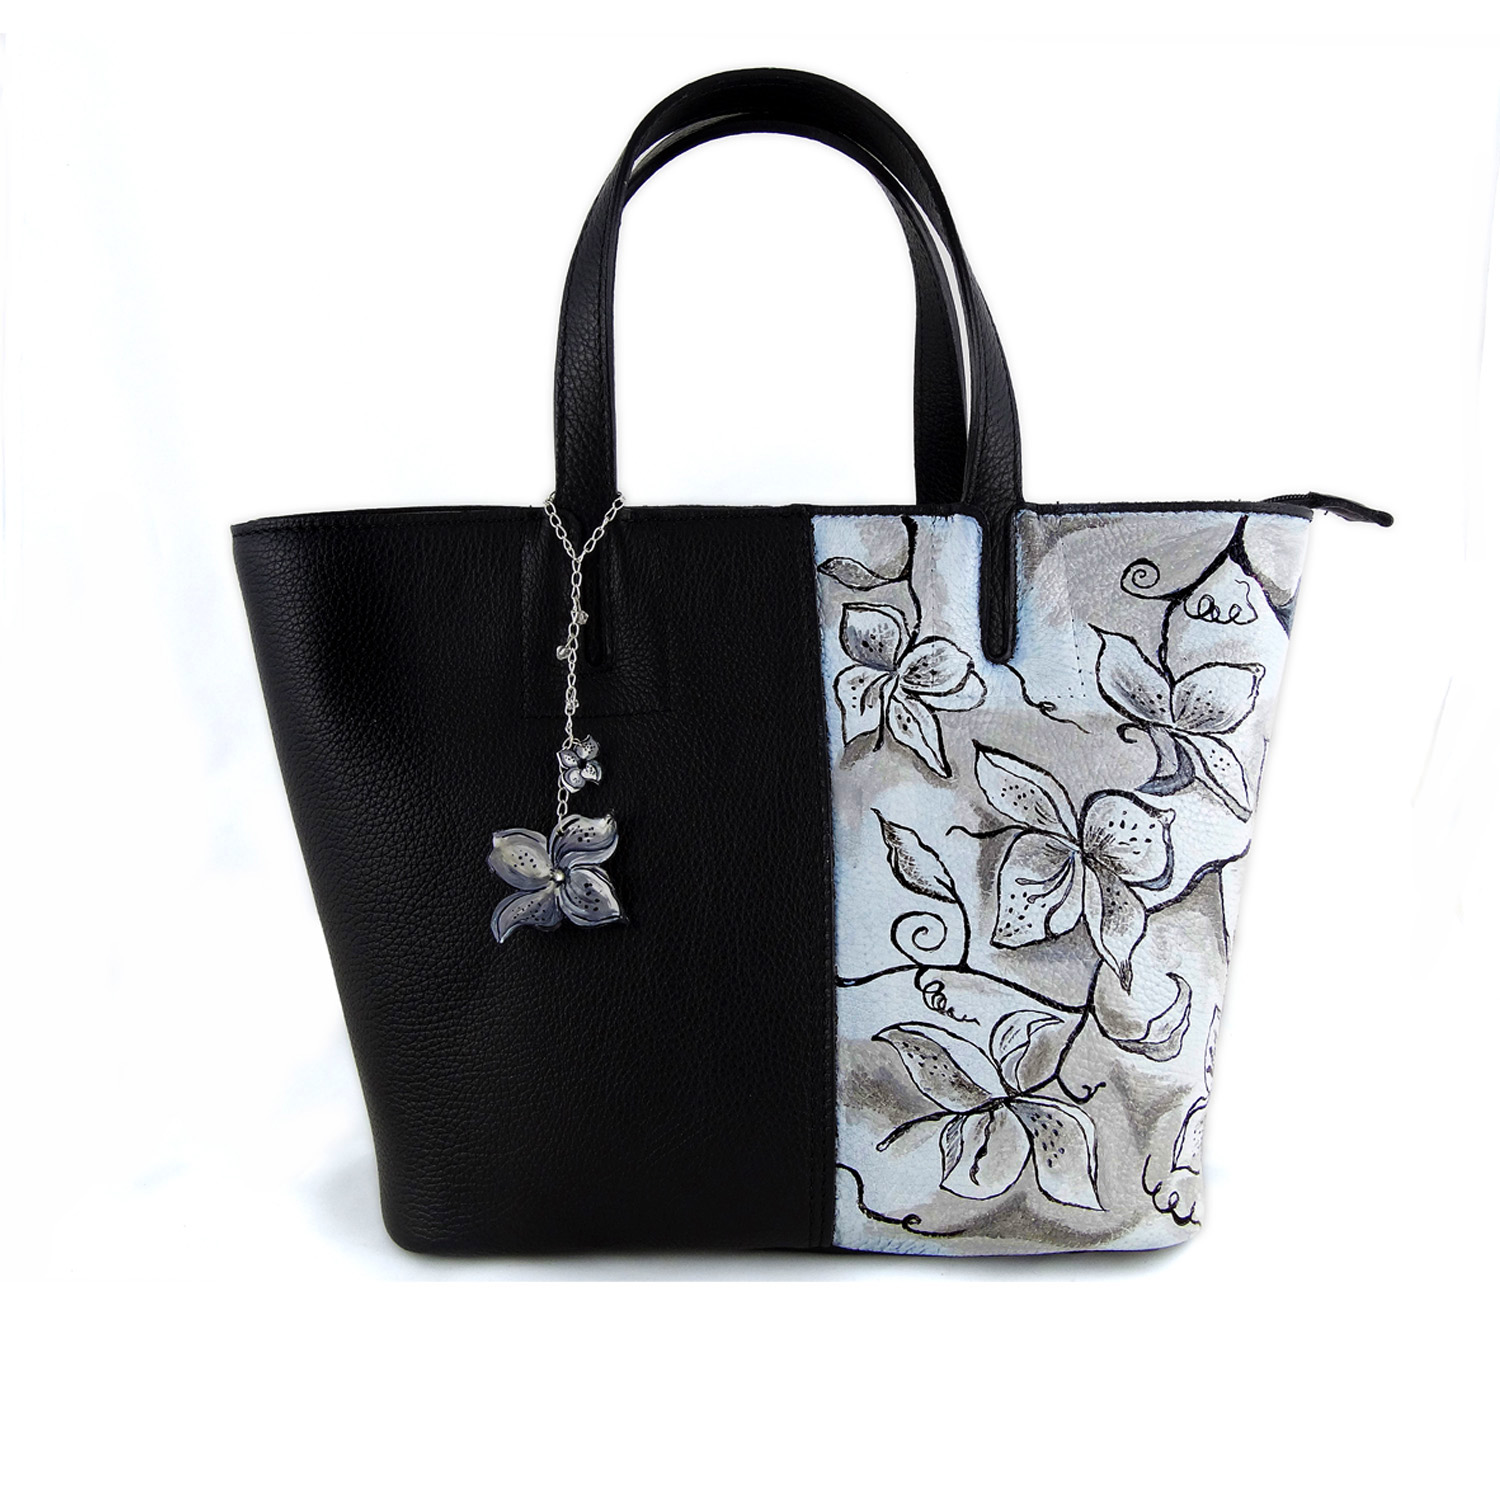 Hand painted bag - Black and white flowers